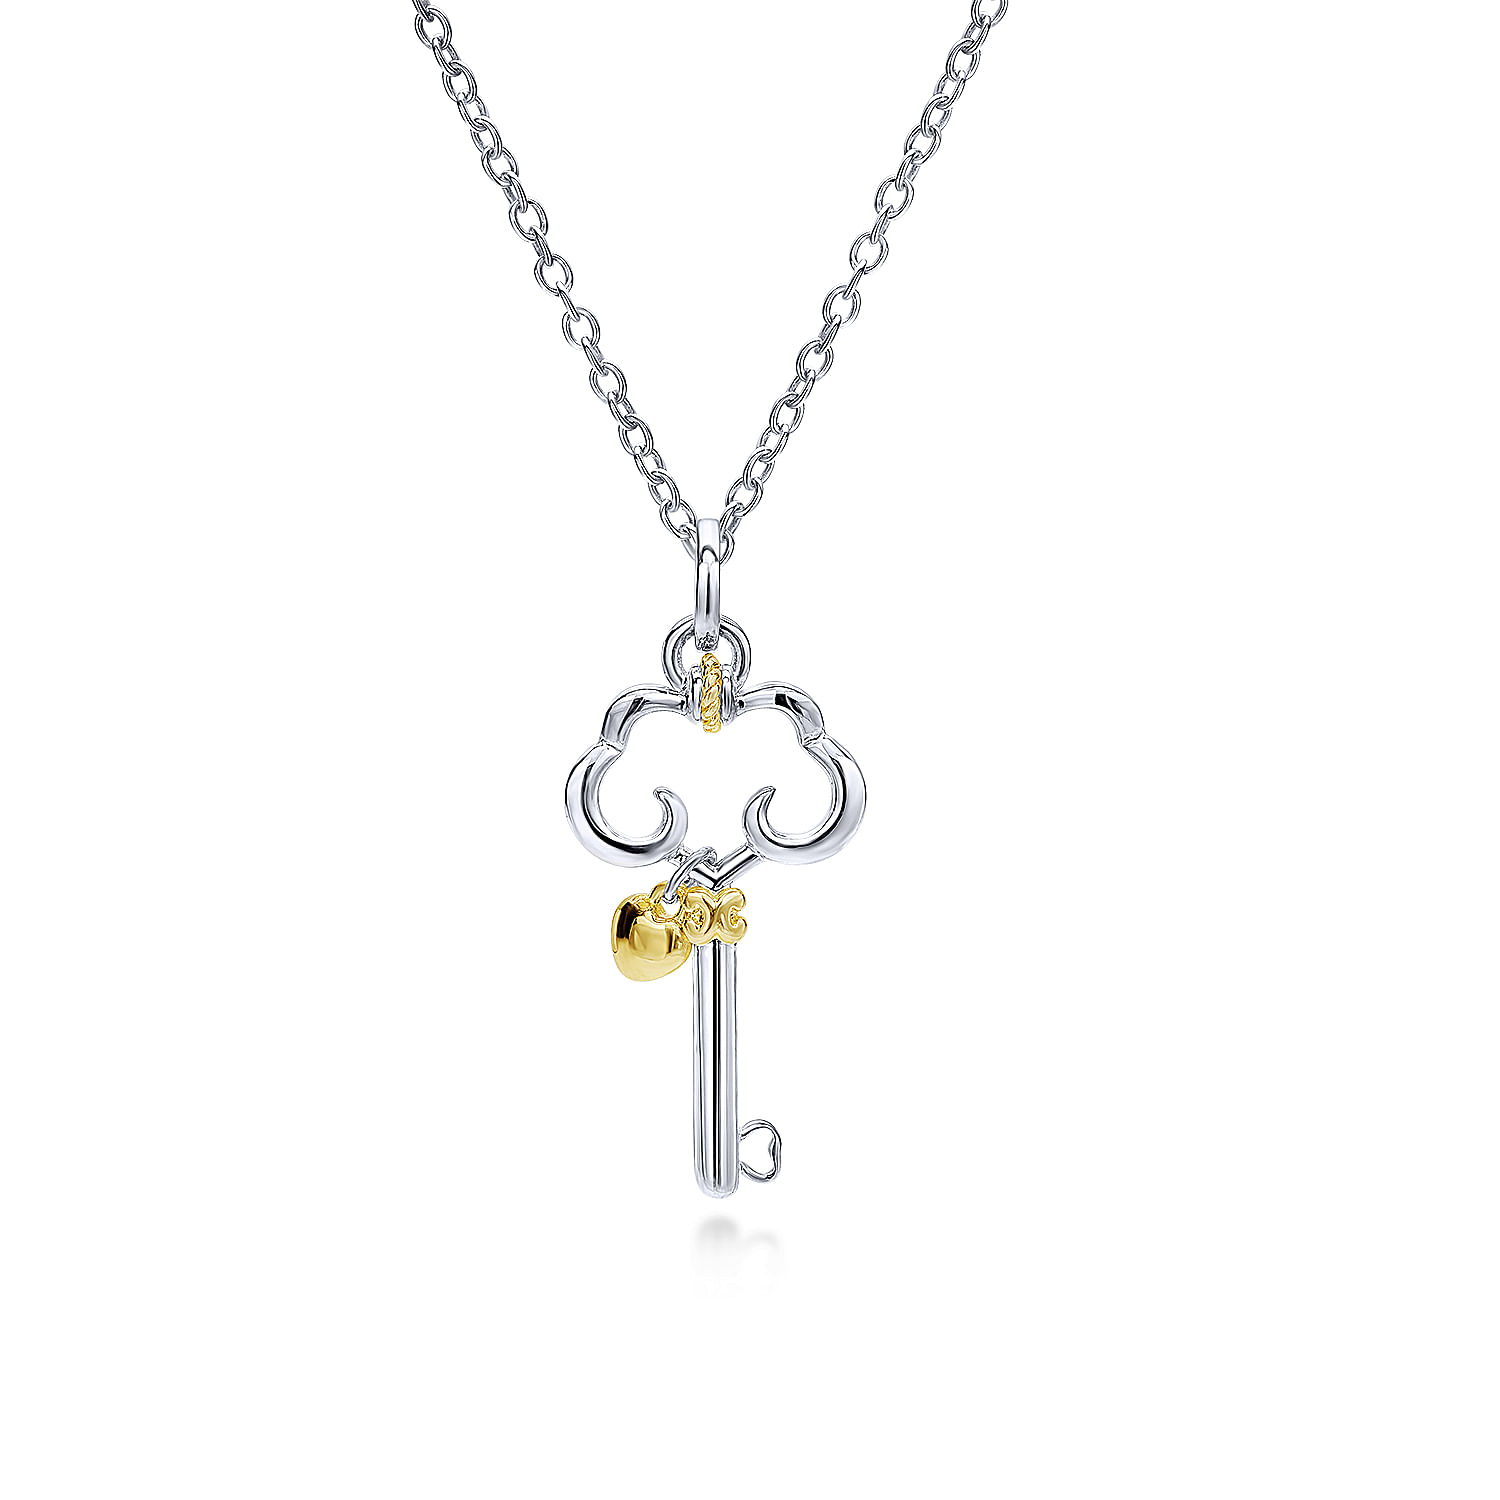 18 inch 925 Sterling Silver 18K Yellow Gold Key Pendant Necklace